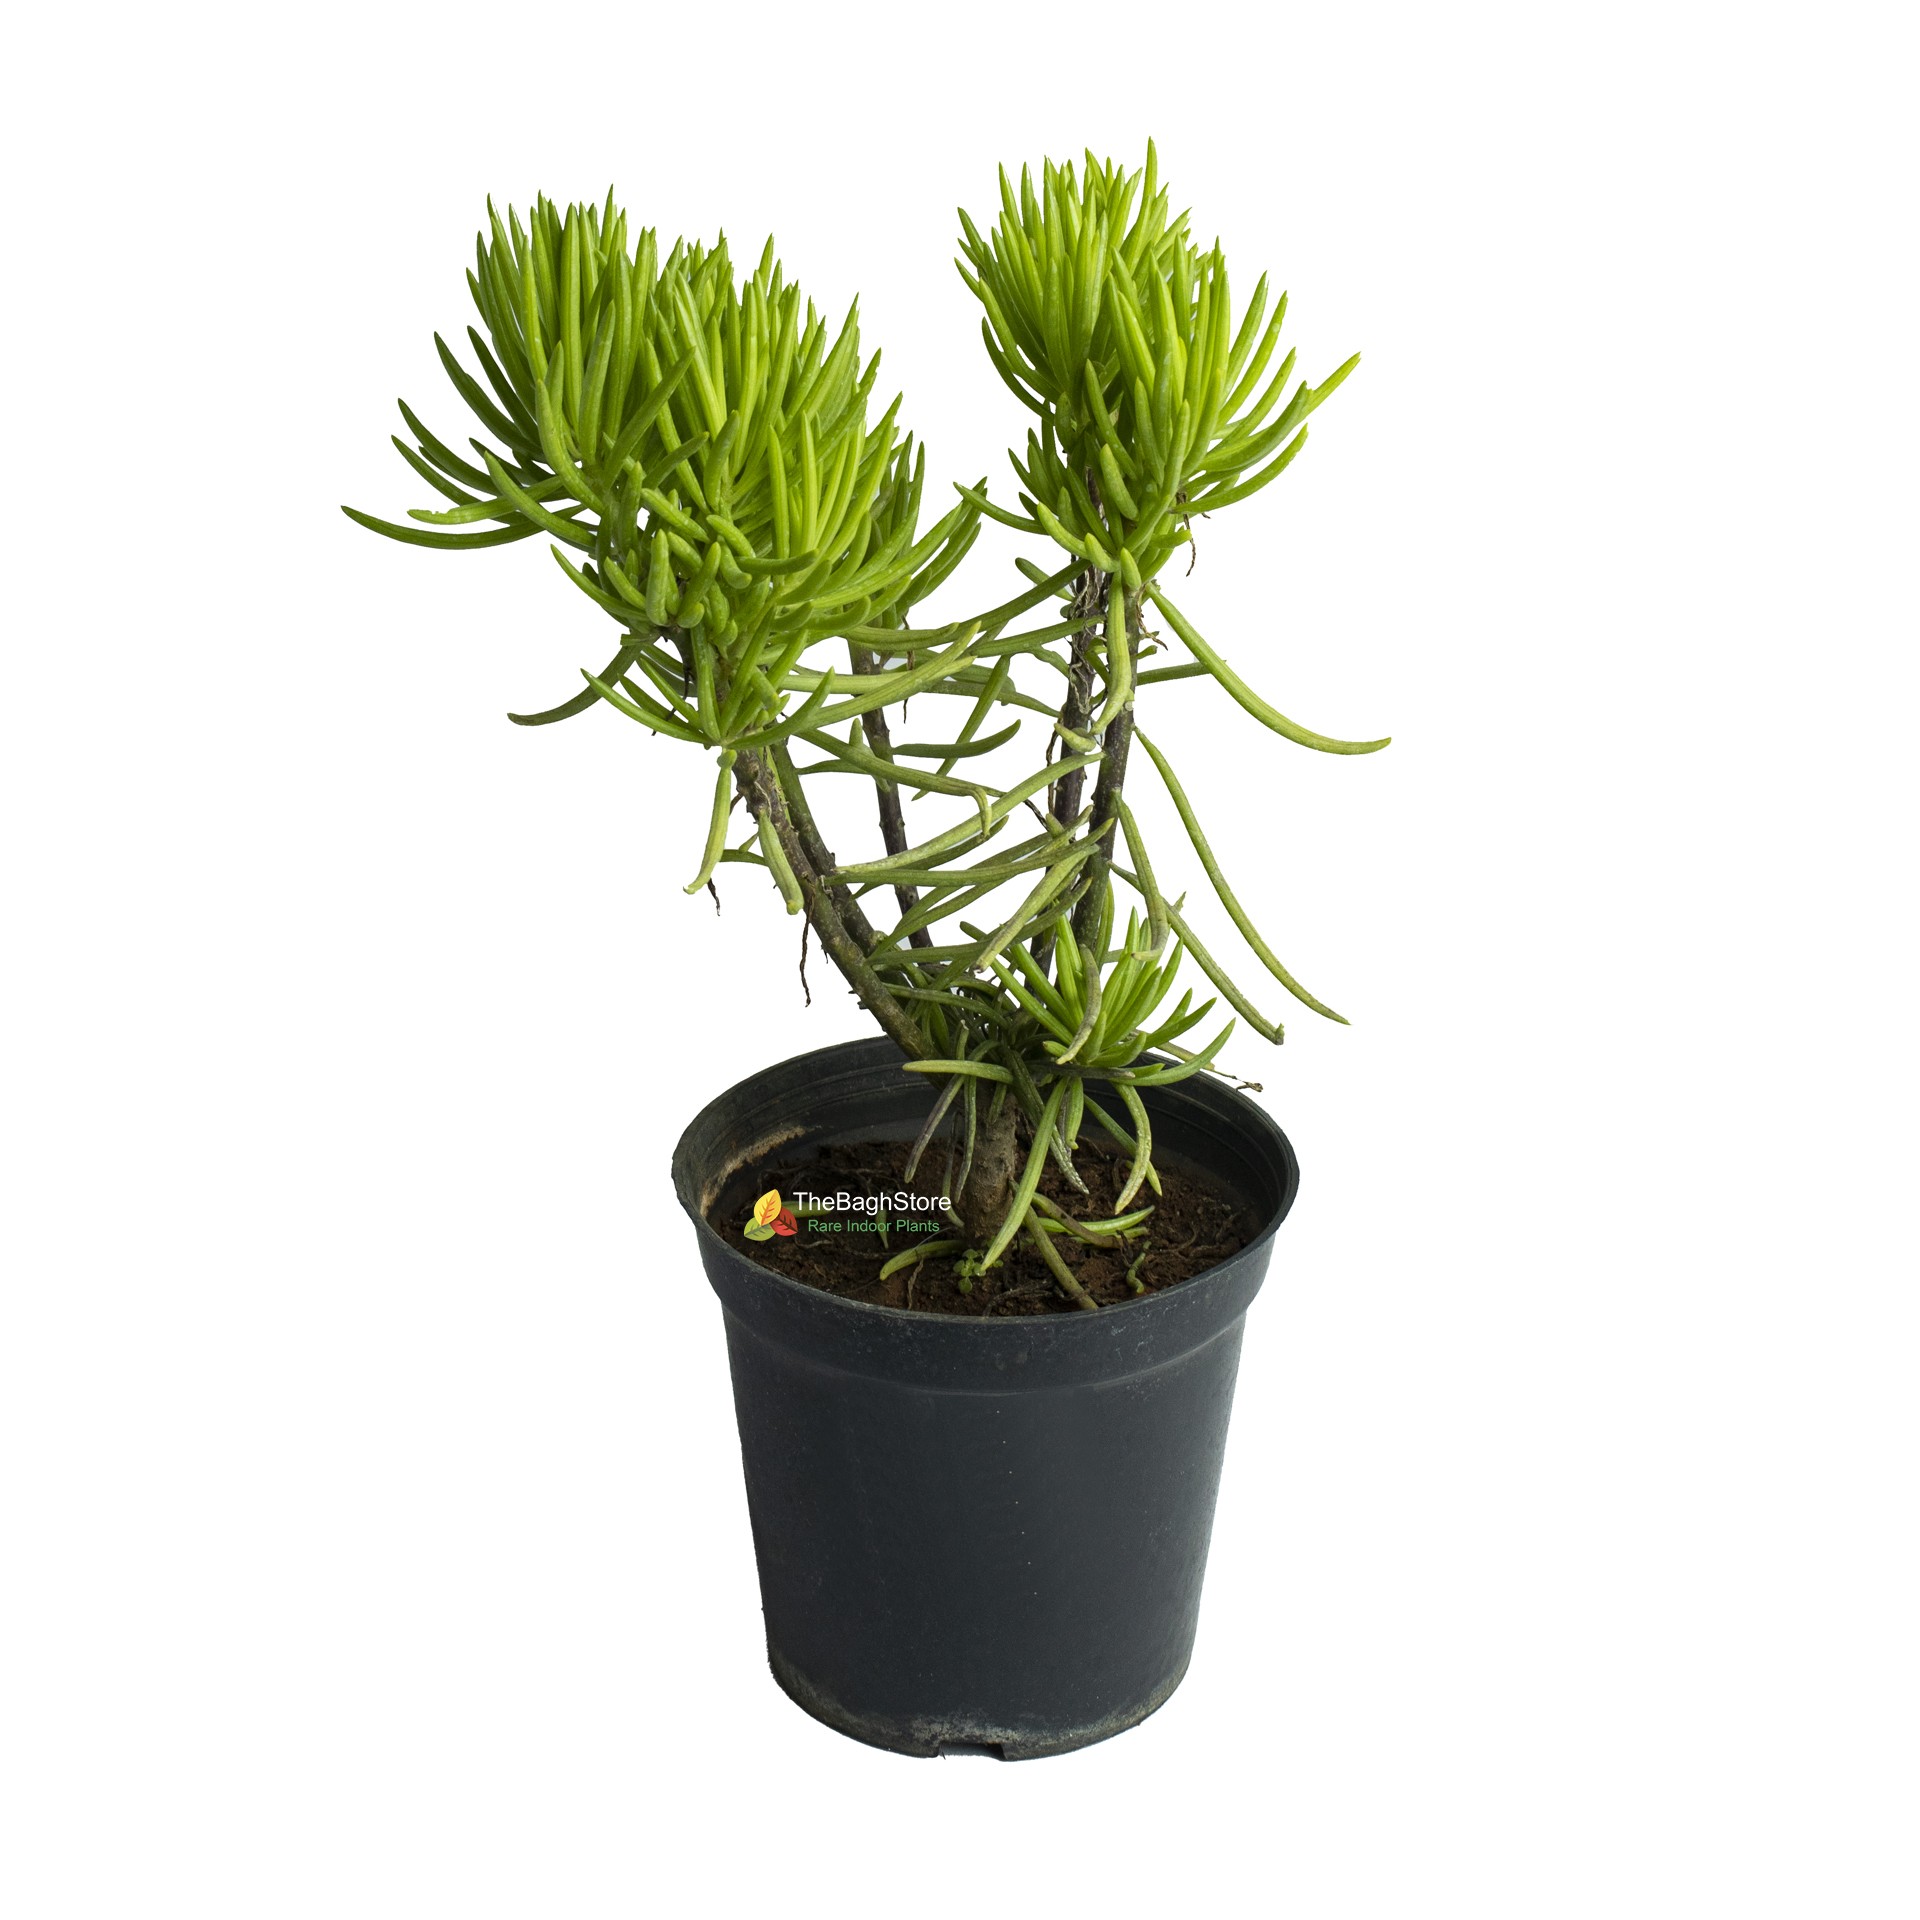 Image of Cypress spurge plant in a pot